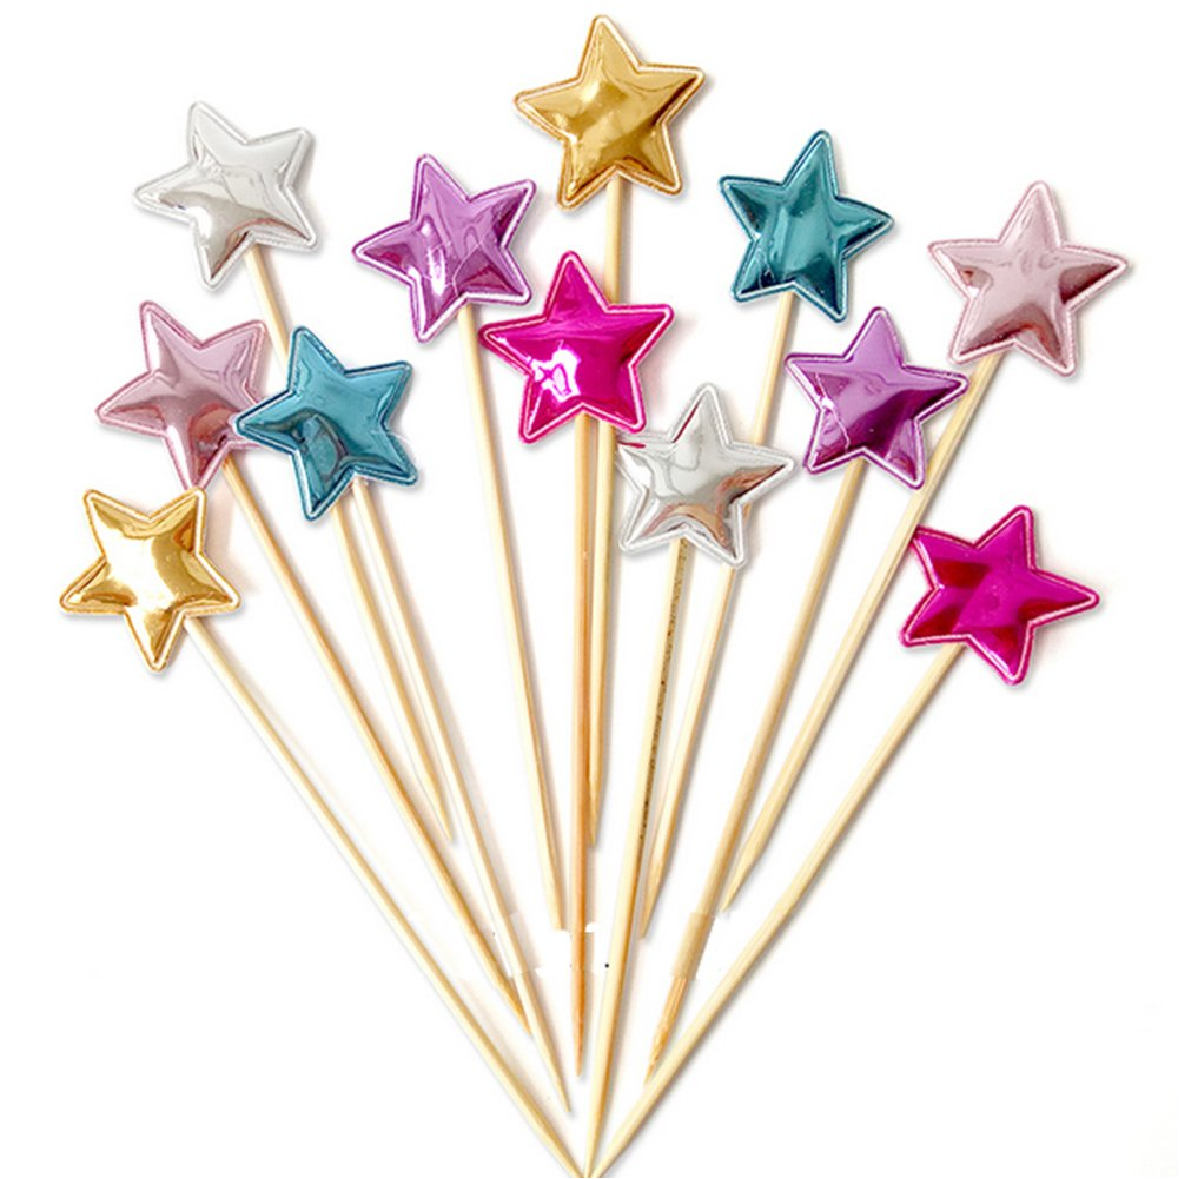 Cupcake Topper Cake Topper Decorations- Gold stars, 50 pack - Rampant Coffee Company